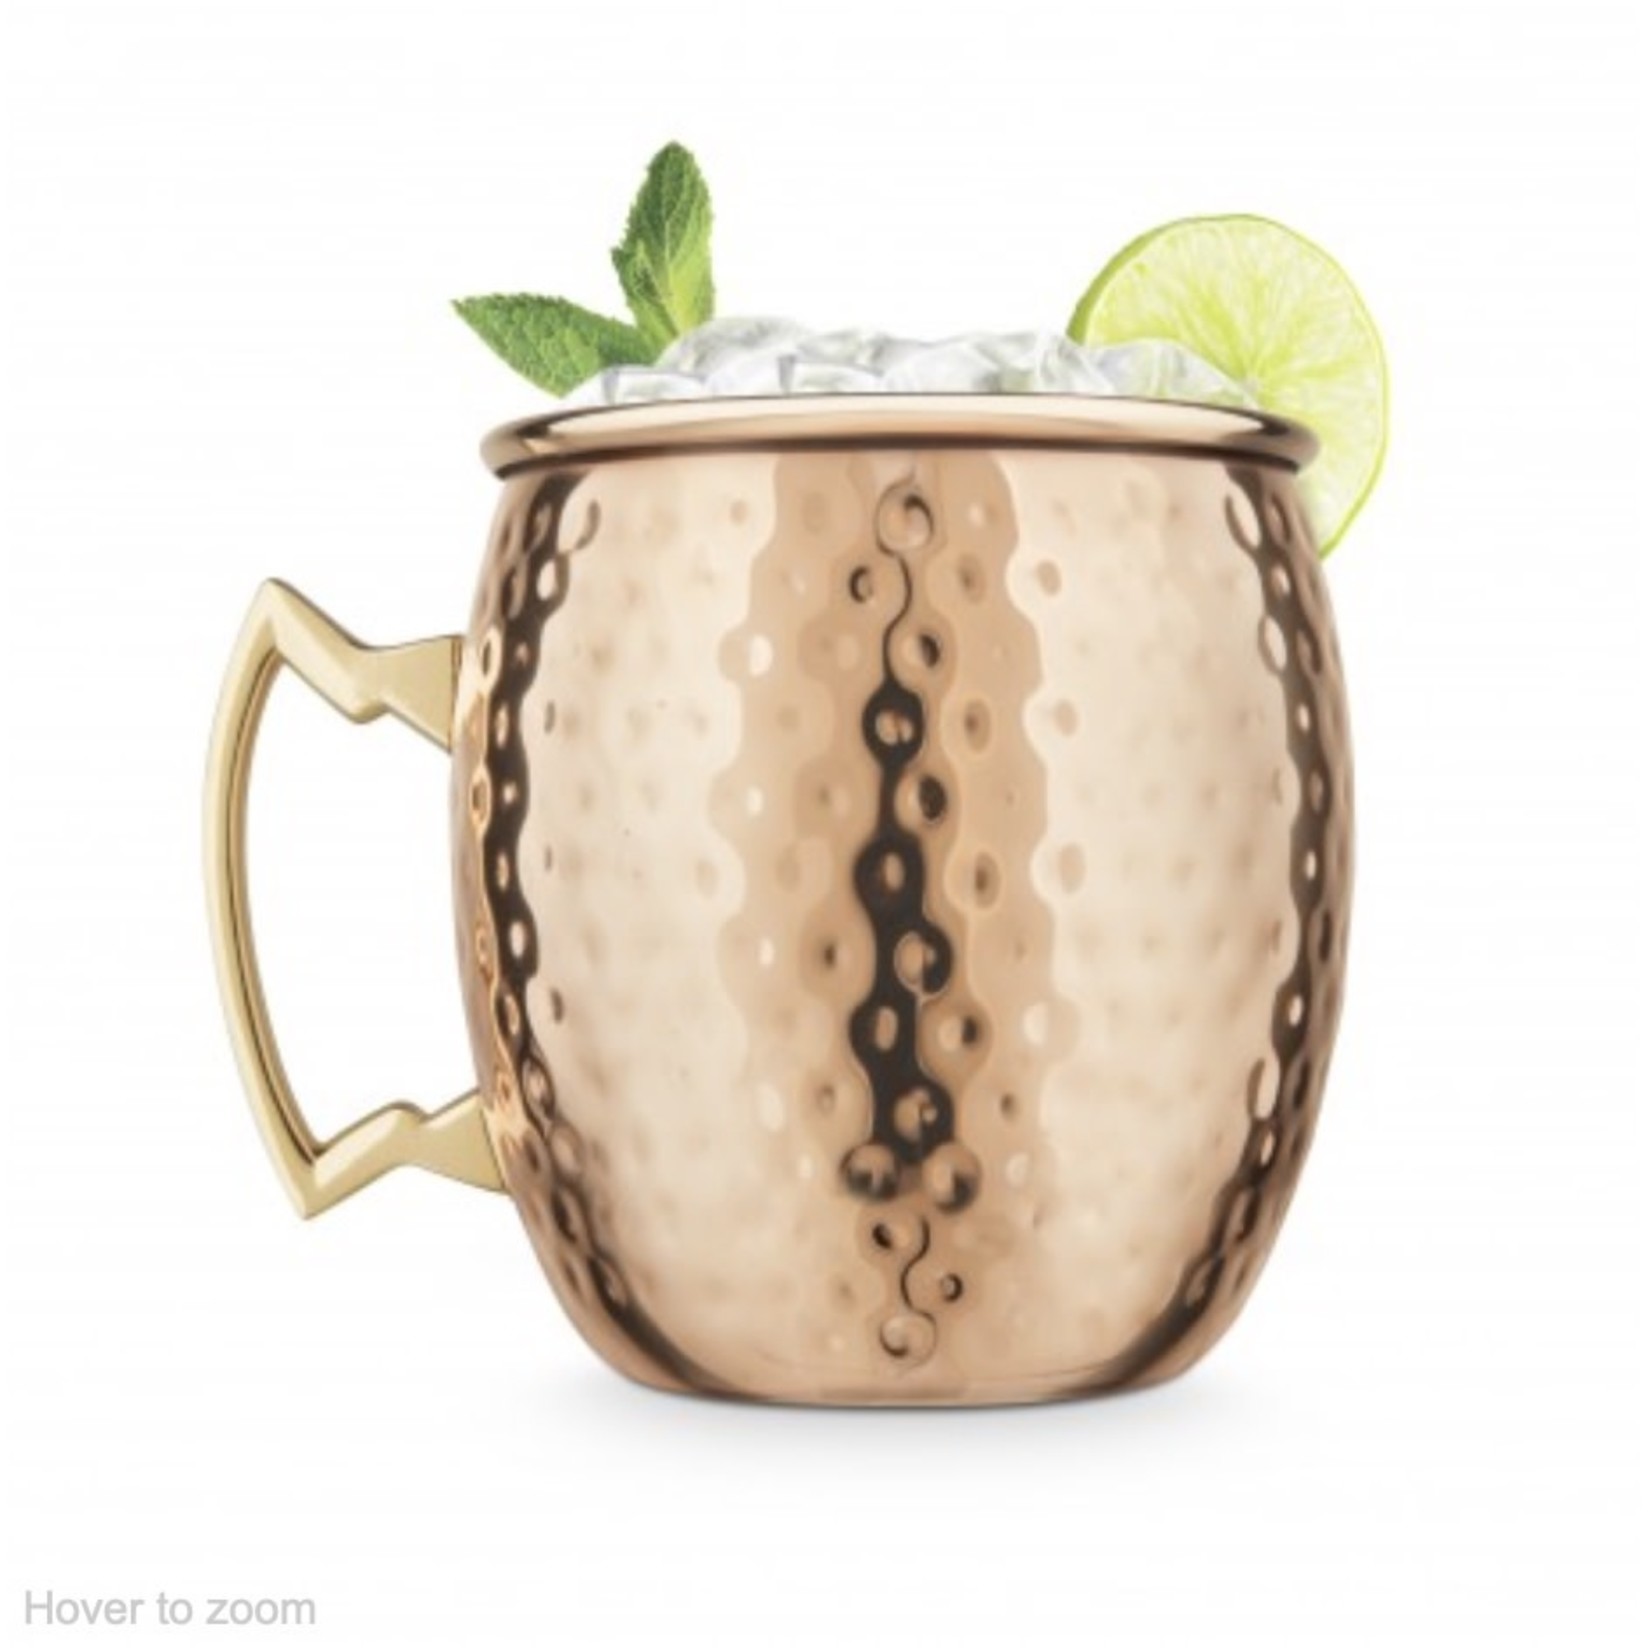 FINAL TOUCH FINAL TOUCH Moscow Mule Hammered - Copper